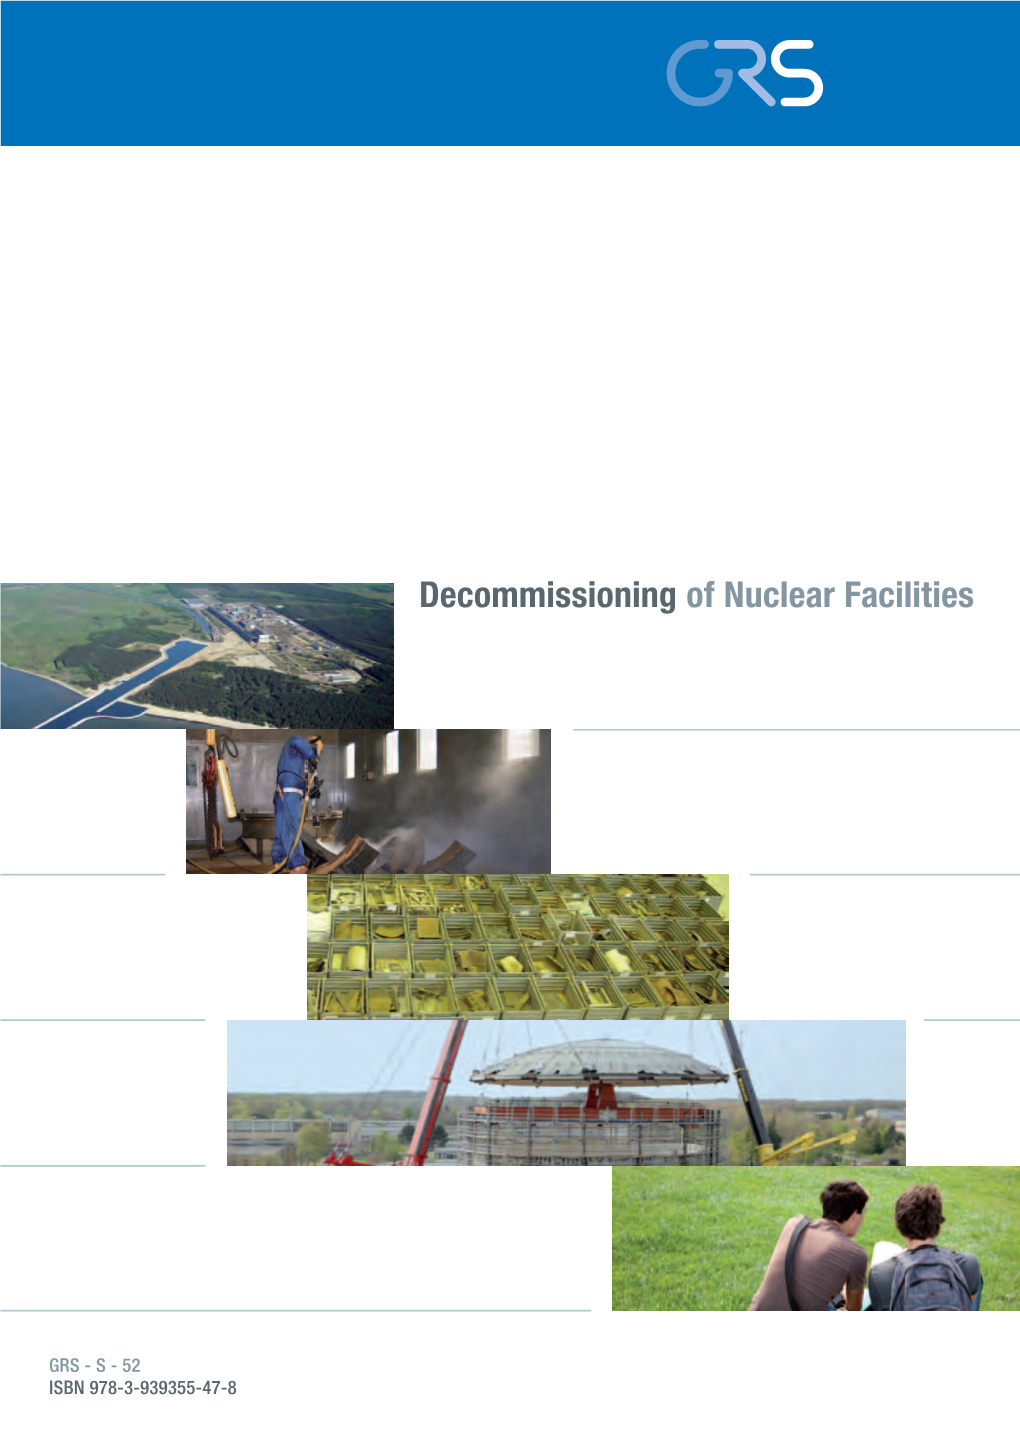 Decommissioning of Nuclear Facilities